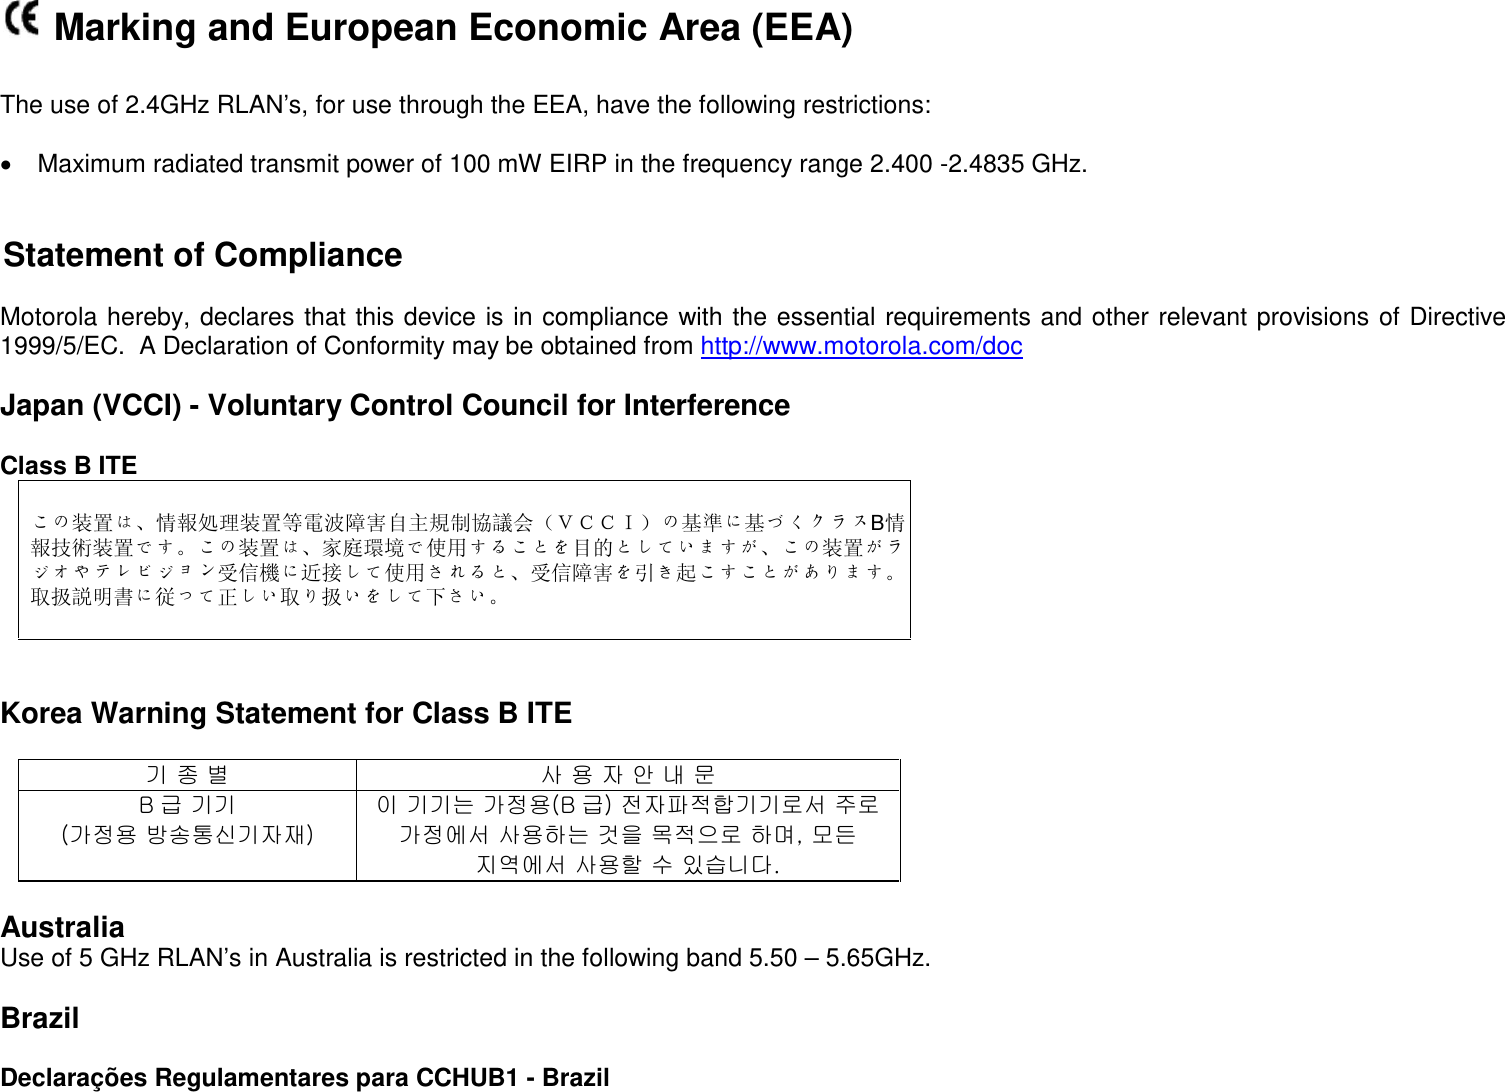  Marking and European Economic Area (EEA)  The use of 2.4GHz RLAN’s, for use through the EEA, have the following restrictions:  • Maximum radiated transmit power of 100 mW EIRP in the frequency range 2.400 -2.4835 GHz.   Statement of Compliance   Motorola hereby, declares that this device is in compliance with the essential requirements and other relevant provisions of Directive 1999/5/EC.  A Declaration of Conformity may be obtained from http://www.motorola.com/doc  Japan (VCCI) - Voluntary Control Council for Interference  Class B ITE  この装置は、情報処理装置等電波障害自主規制協議会（ＶＣＣＩ）の基準に基づくクラスB情報技術装置です。この装置は、家庭環境で使用することを目的としていますが、この装置がラジオやテレビジョン受信機に近接して使用されると、受信障害を引き起こすことがあります。   取扱説明書に従って正しい取り扱いをして下さい。    Korea Warning Statement for Class B ITE  기 종 별 사 용 자 안 내 문 B급 기기 (가정용 방송통신기자재) 이 기기는 가정용(B 급) 전자파적합기기로서 주로 가정에서 사용하는 것을 목적으로 하며, 모든 지역에서 사용할 수 있습니다.  Australia Use of 5 GHz RLAN’s in Australia is restricted in the following band 5.50 – 5.65GHz.  Brazil  Declarações Regulamentares para CCHUB1 - Brazil 